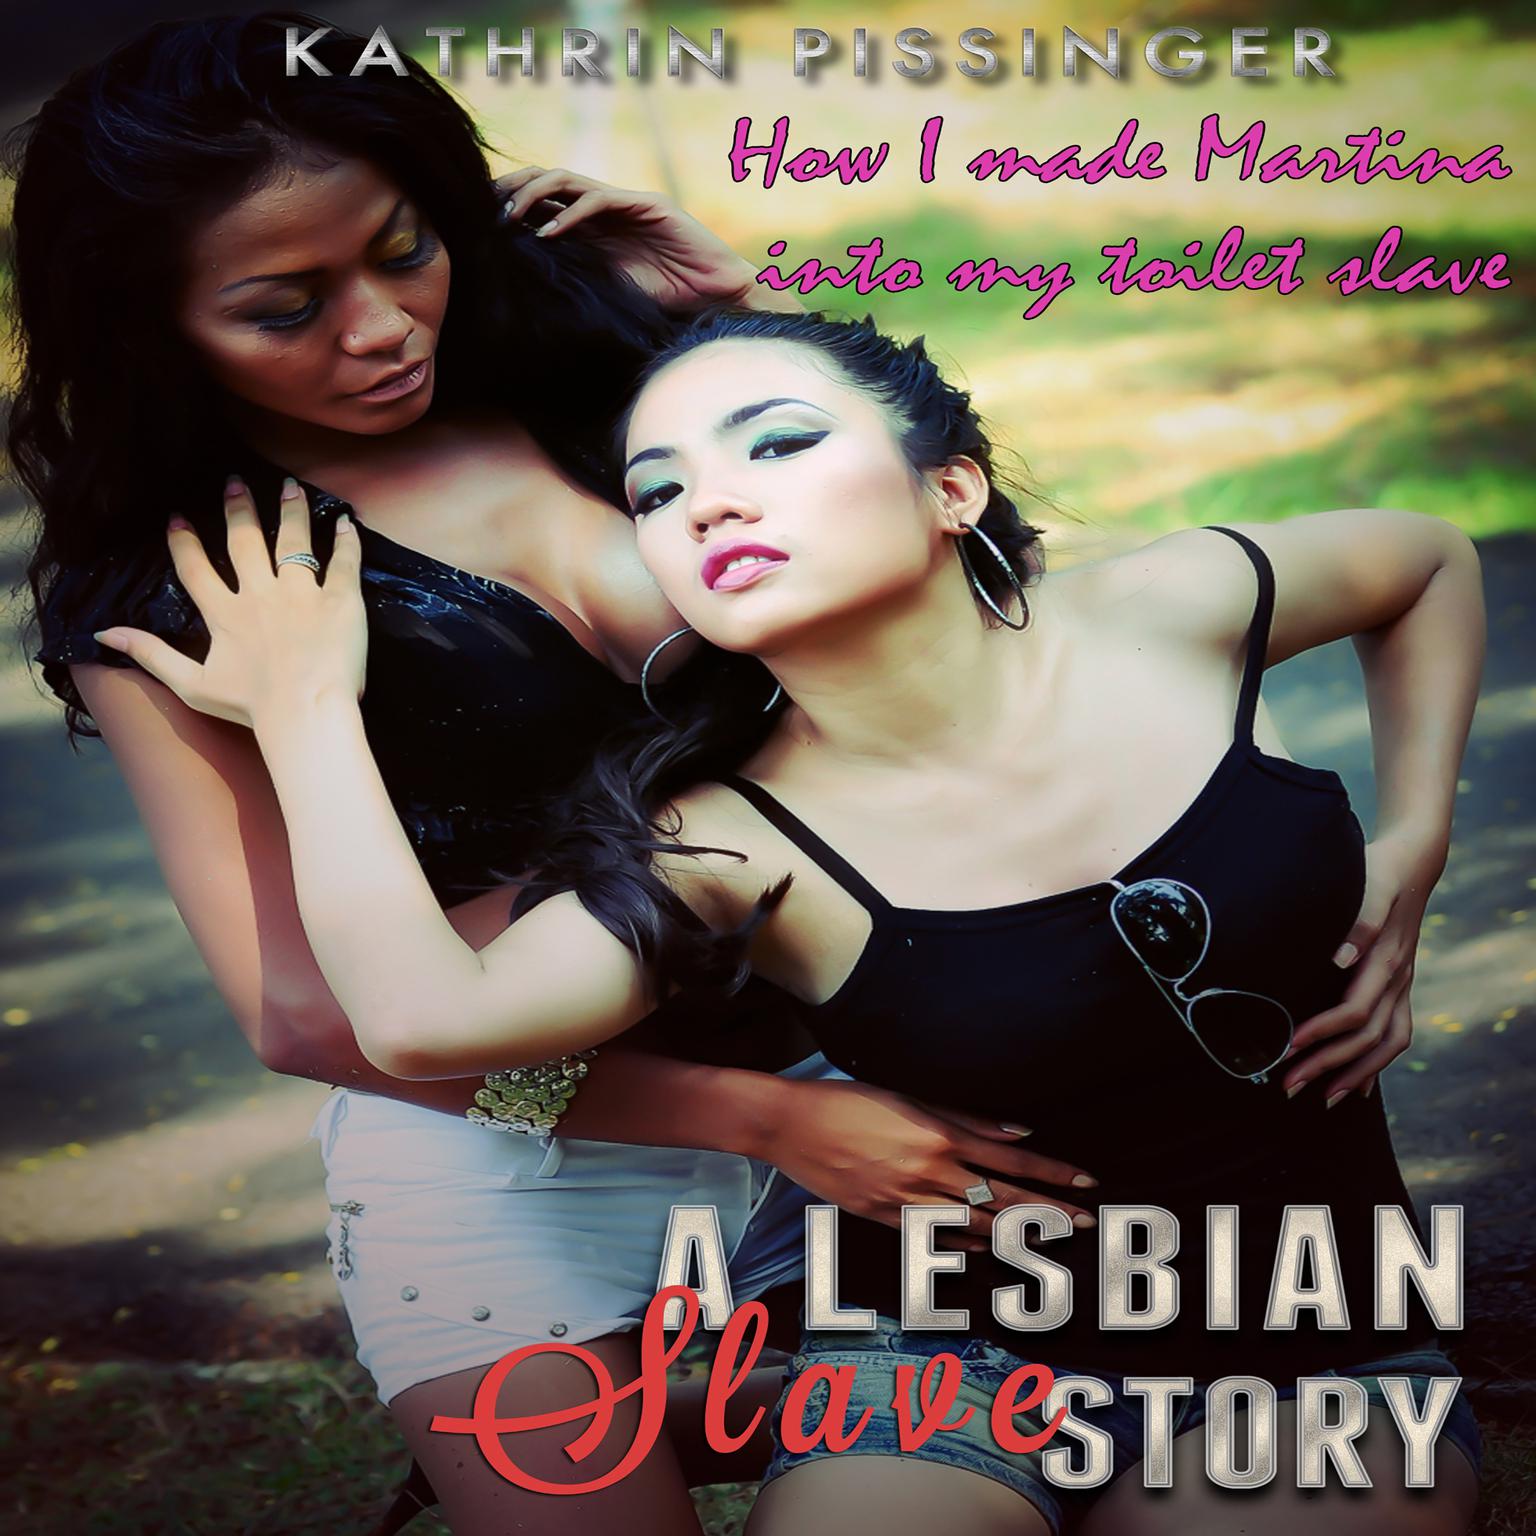 How I made Martina into my toilet slave Audiobook, by Kathrin Pissinger